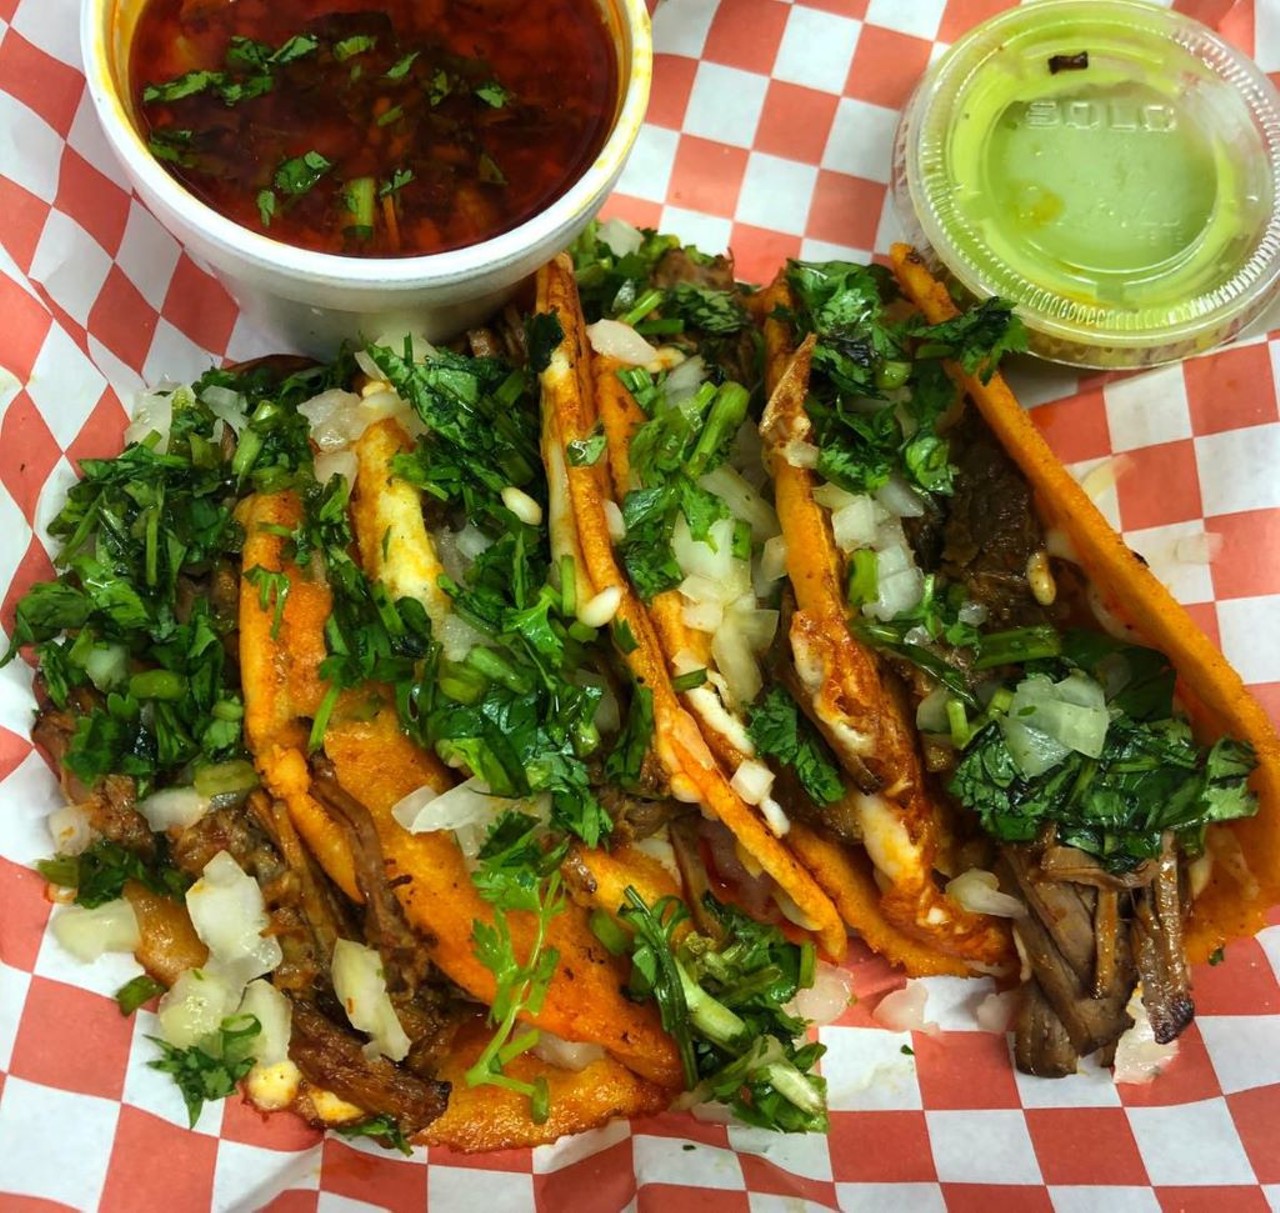 Quesa Loco 
321-972-4503, 971 W. Fairbanks Ave.
The birria craze that took Instagram by storm has finally brought a beloved taco truck into its own brick and mortar shop. Classics from their food truck like birria pizza, elotes and tortas will continue to be served at the new restaurant. 
Photo via Quesa Loco/Facebook